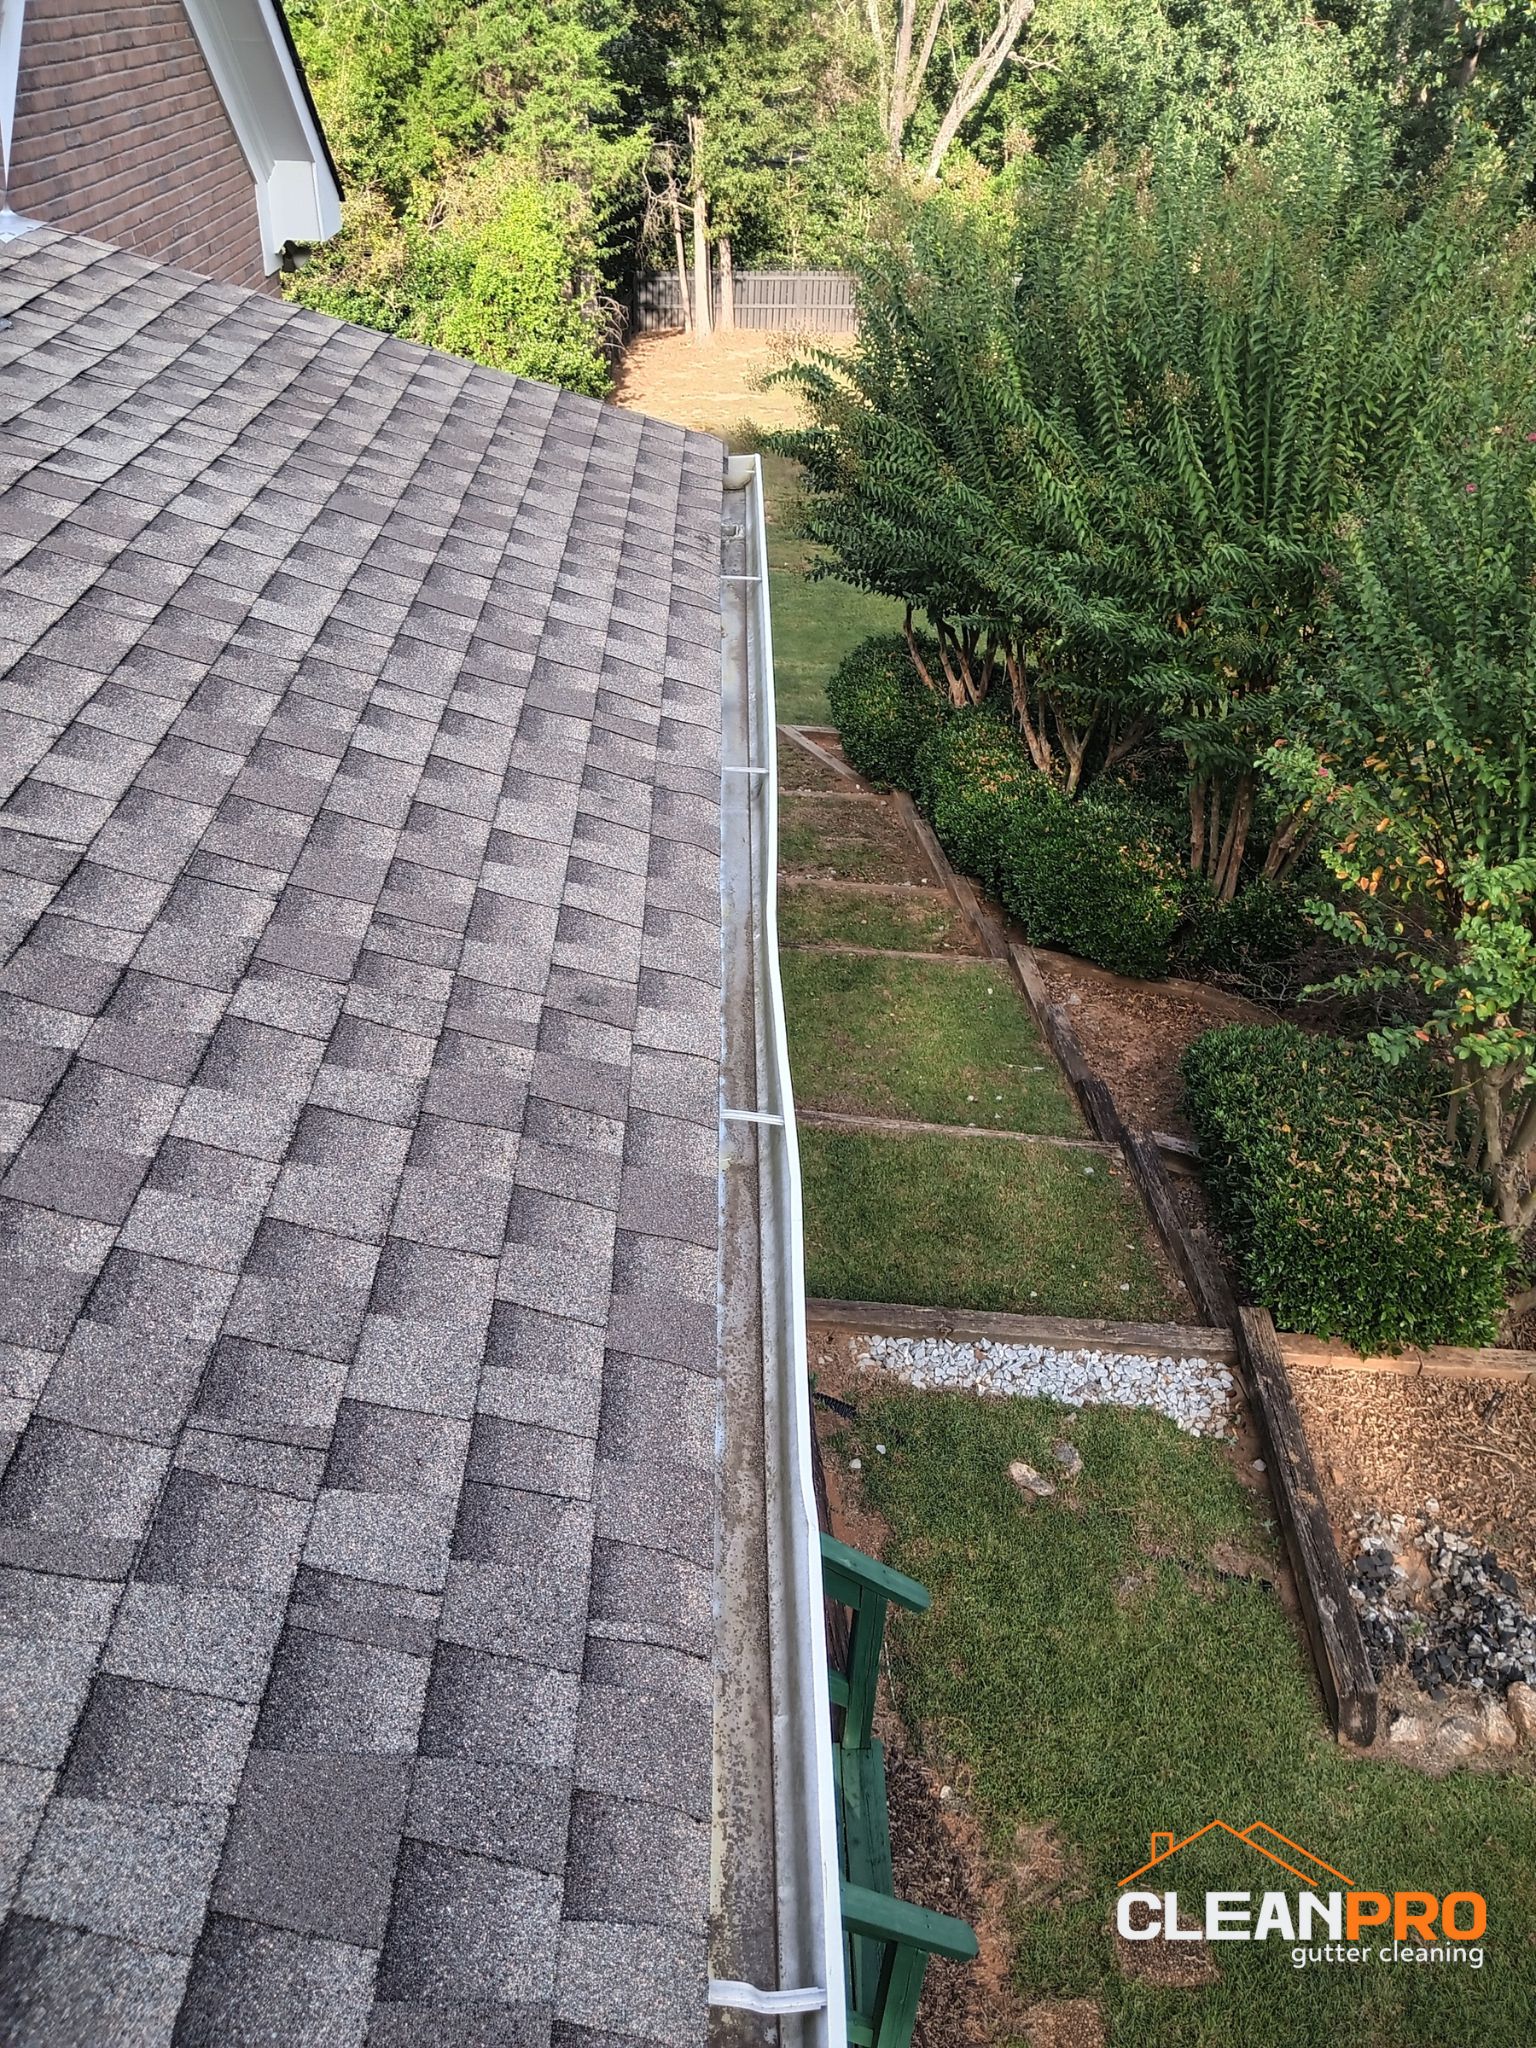 Quality Gutter Cleaning in Des Moines IA